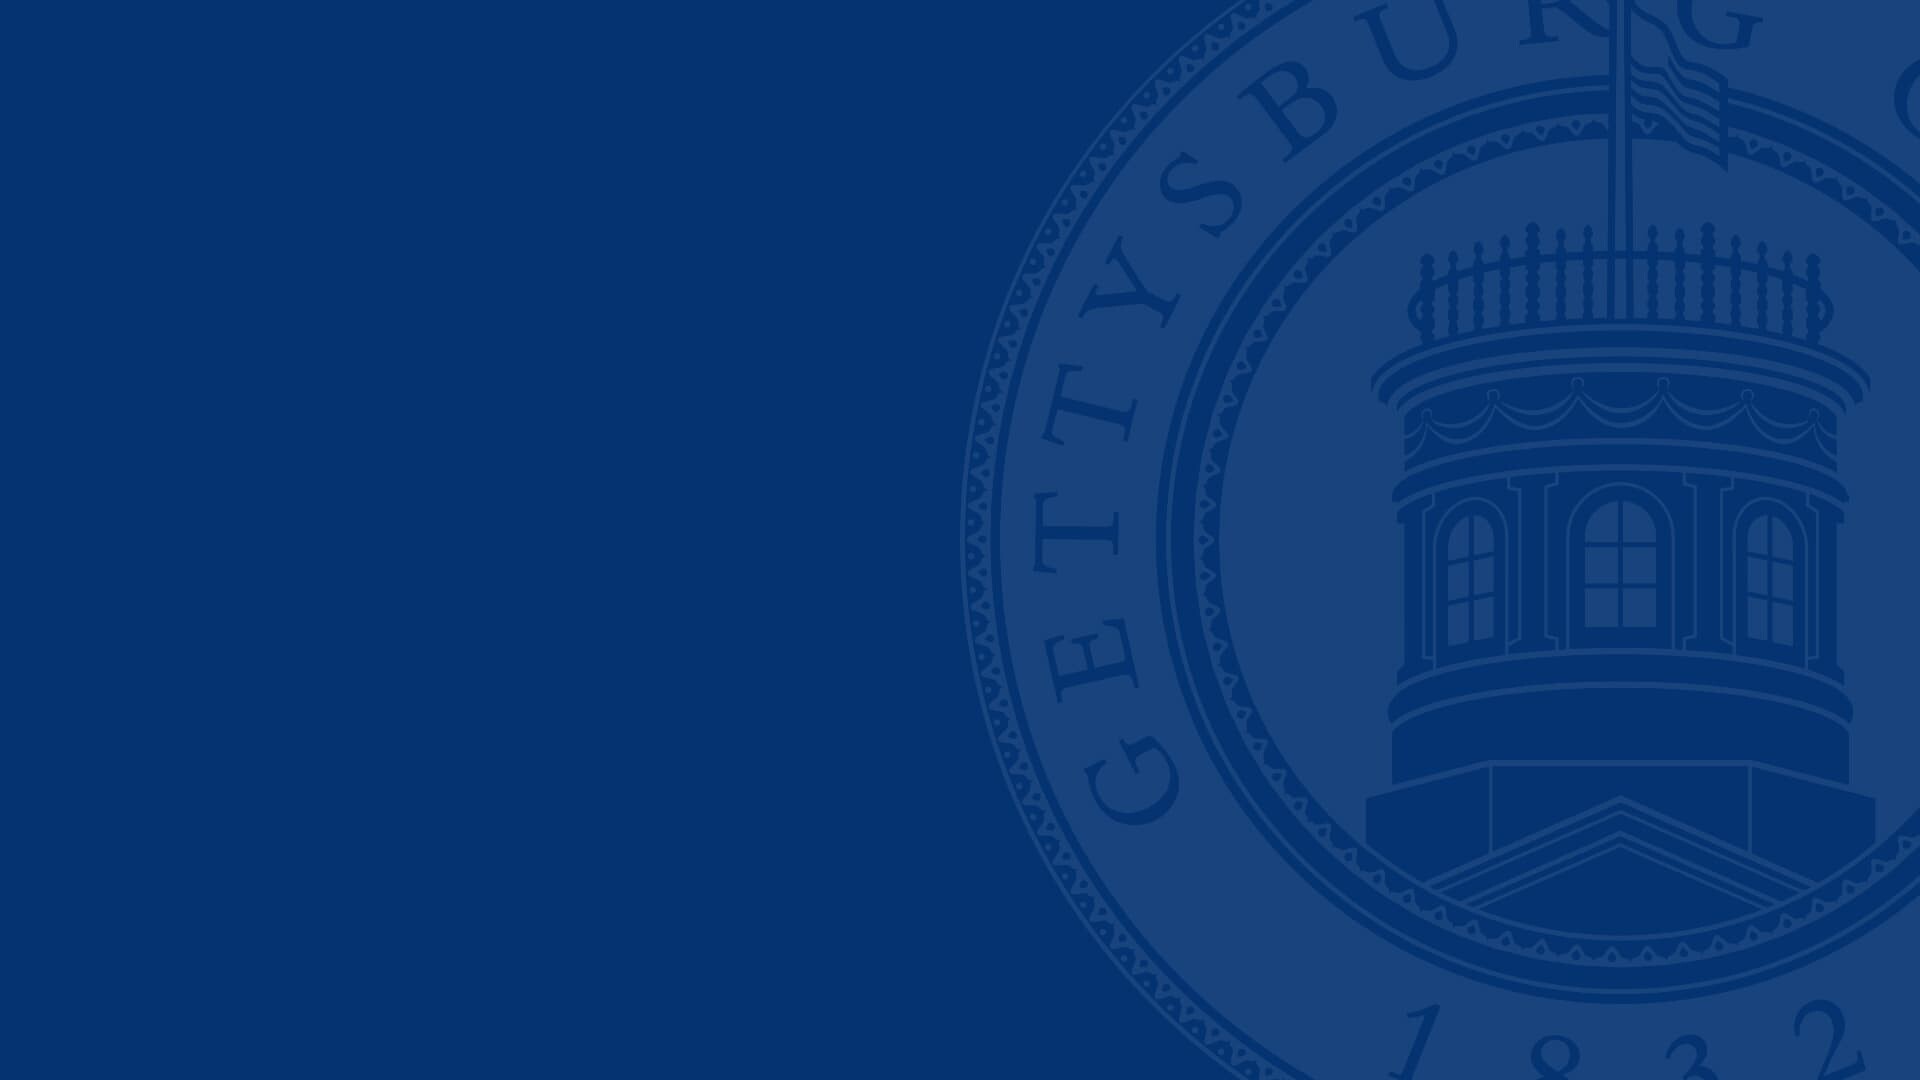 Gettysburg: An emblem of the Pennsylvania College founded in 1832, The 1832 Society. 1920x1080 Full HD Background.